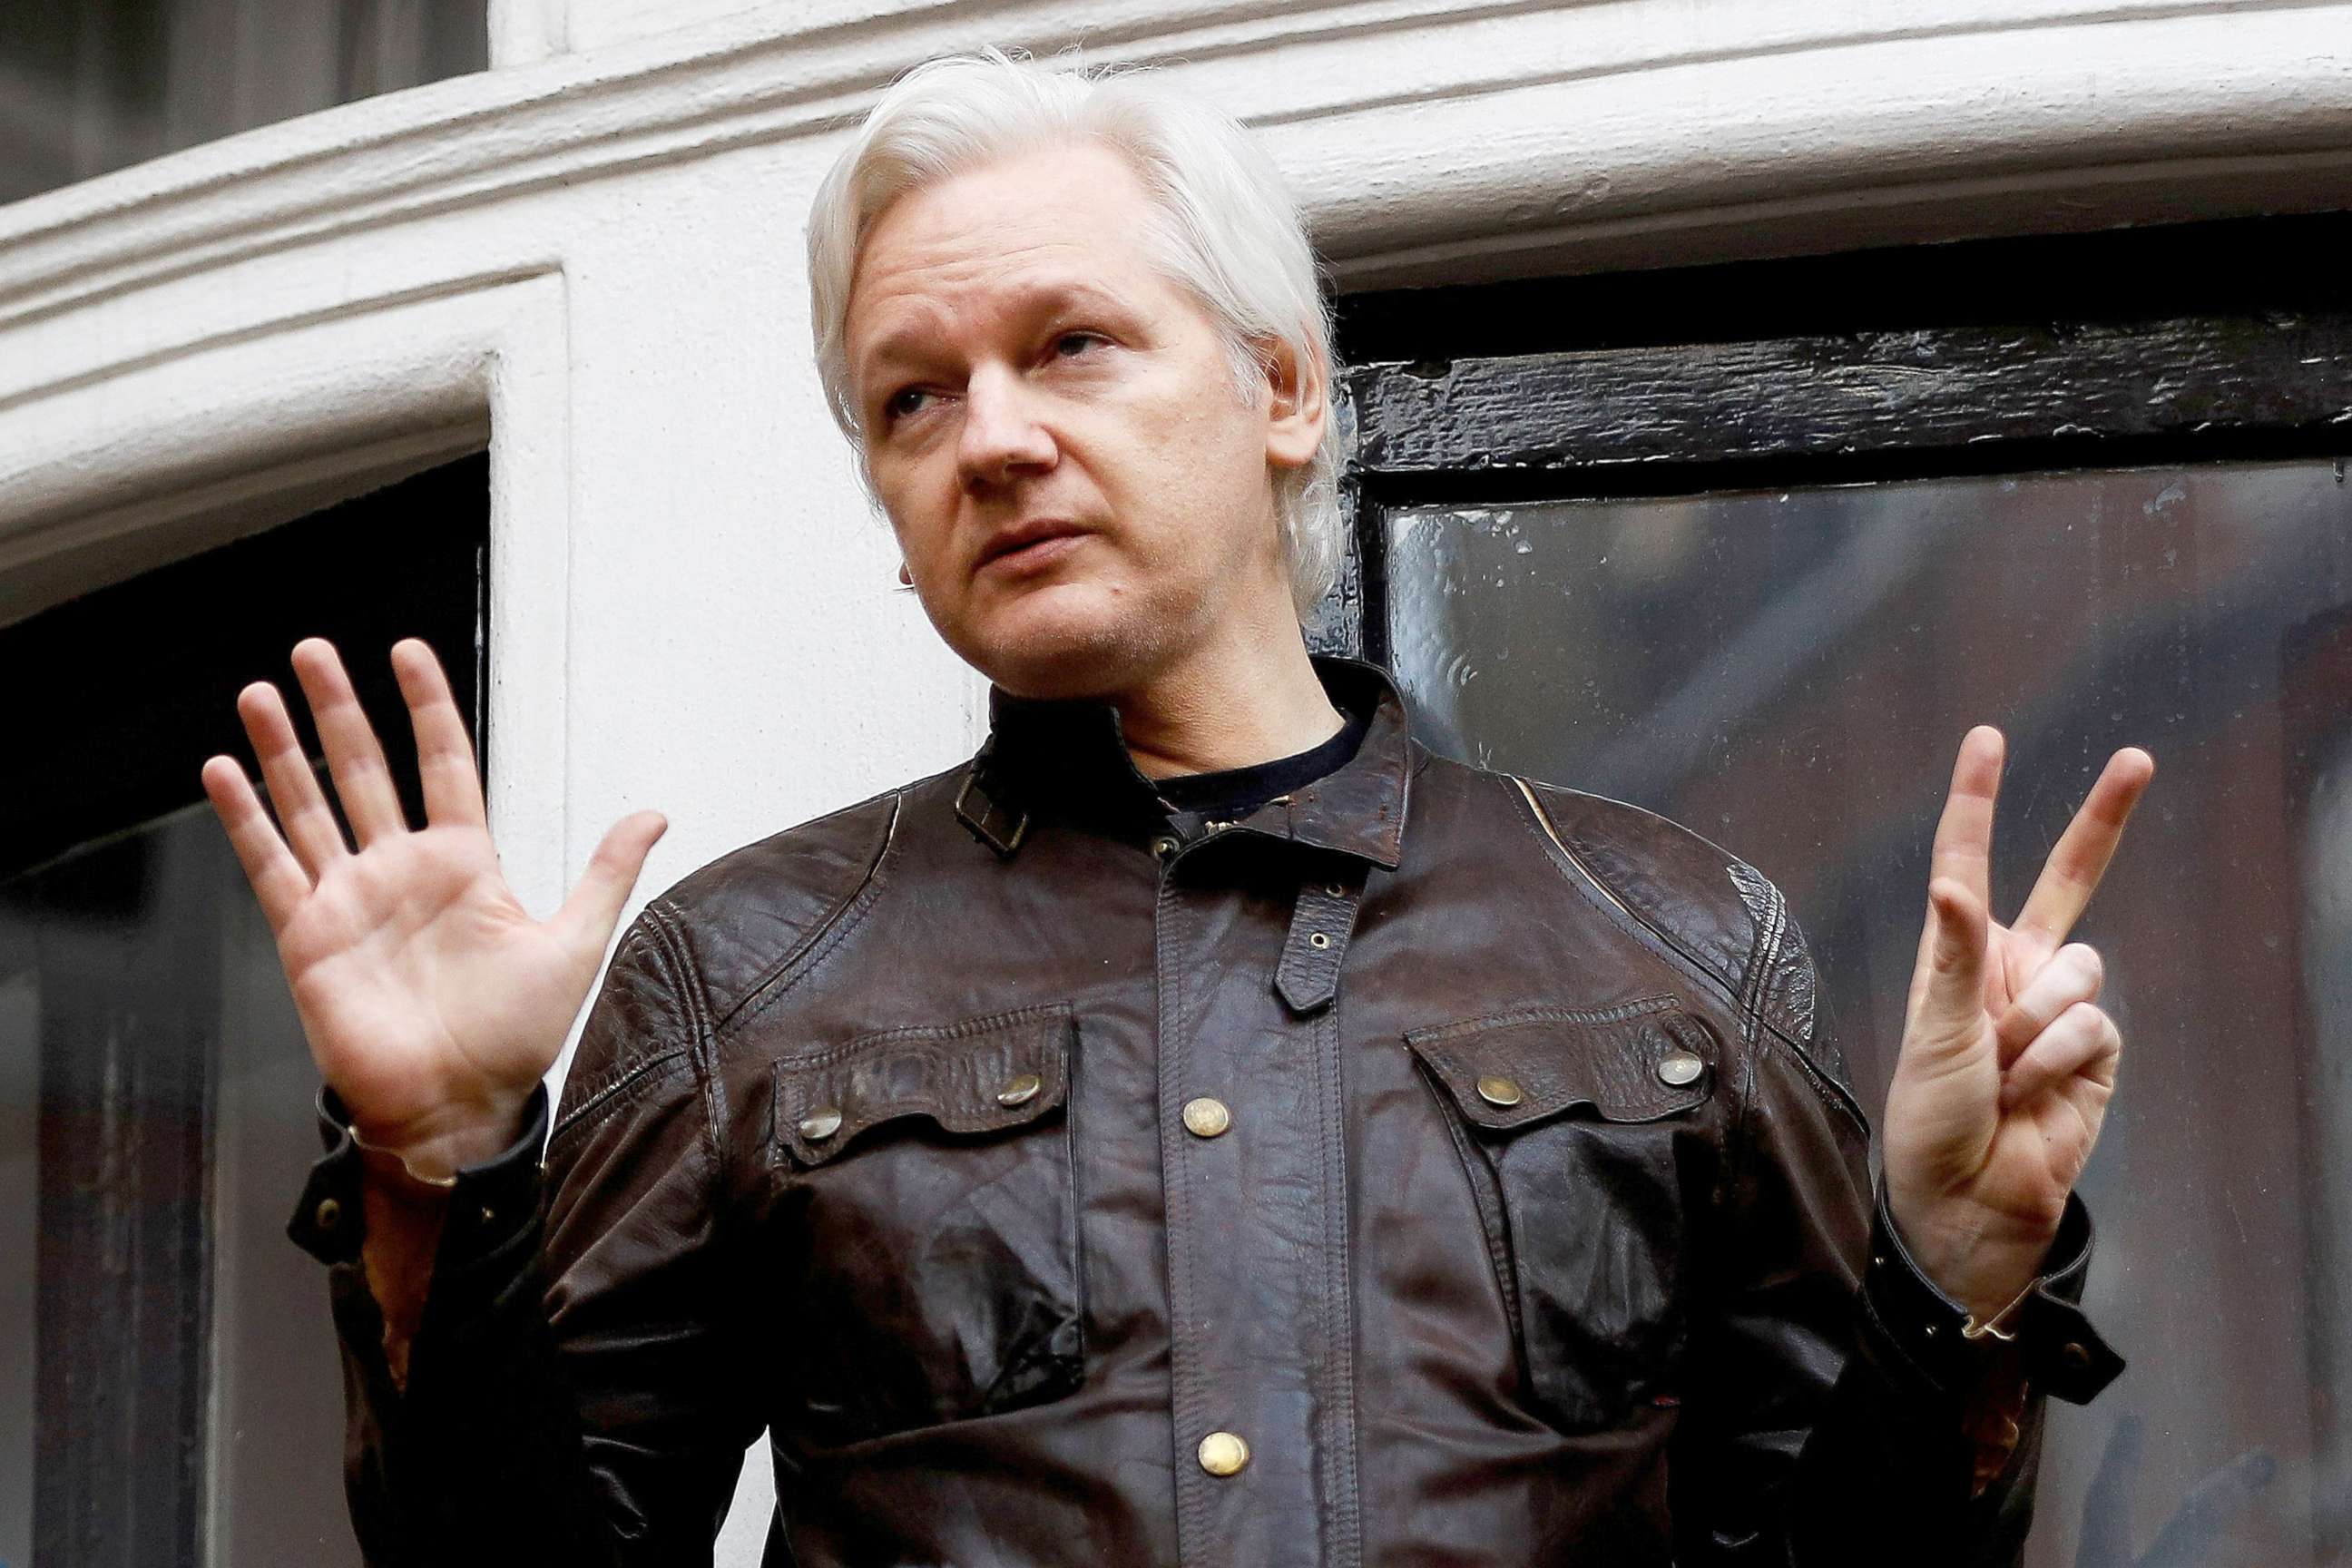 PHOTO: WikiLeaks founder Julian Assange is seen on the balcony of the Ecuadorian Embassy in London, Britain, May 19, 2017. 